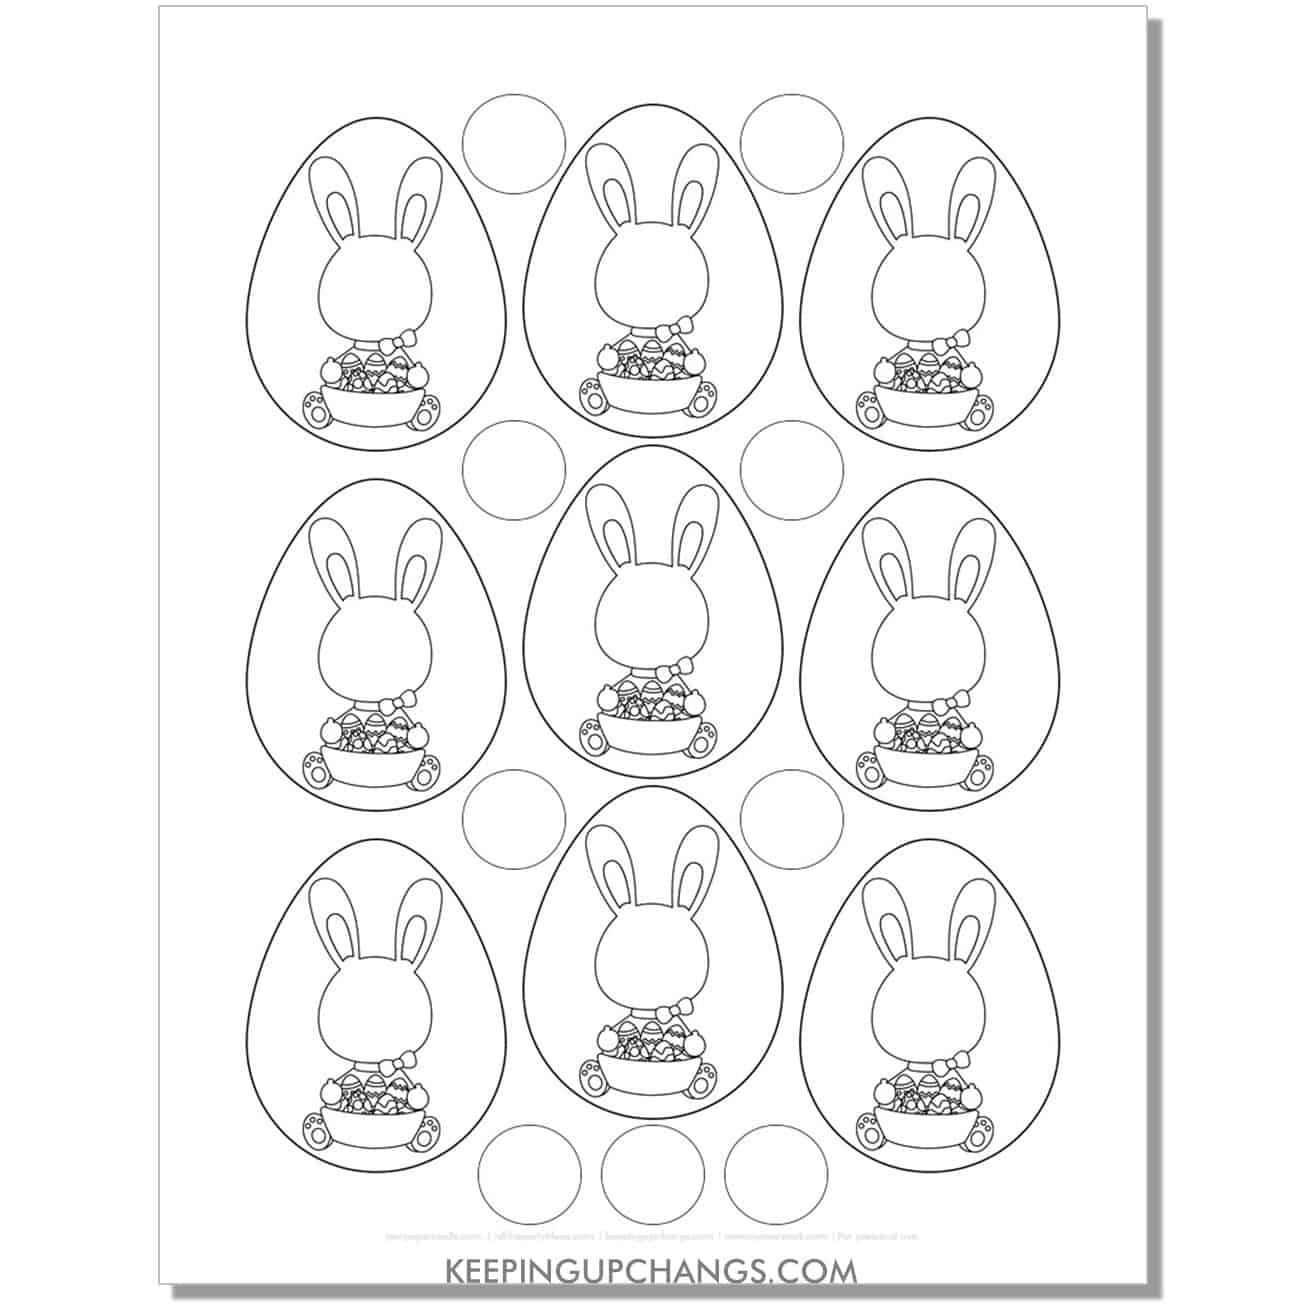 free small, mini surprise easter egg craft bunny rabbit with blank face for kid picture.